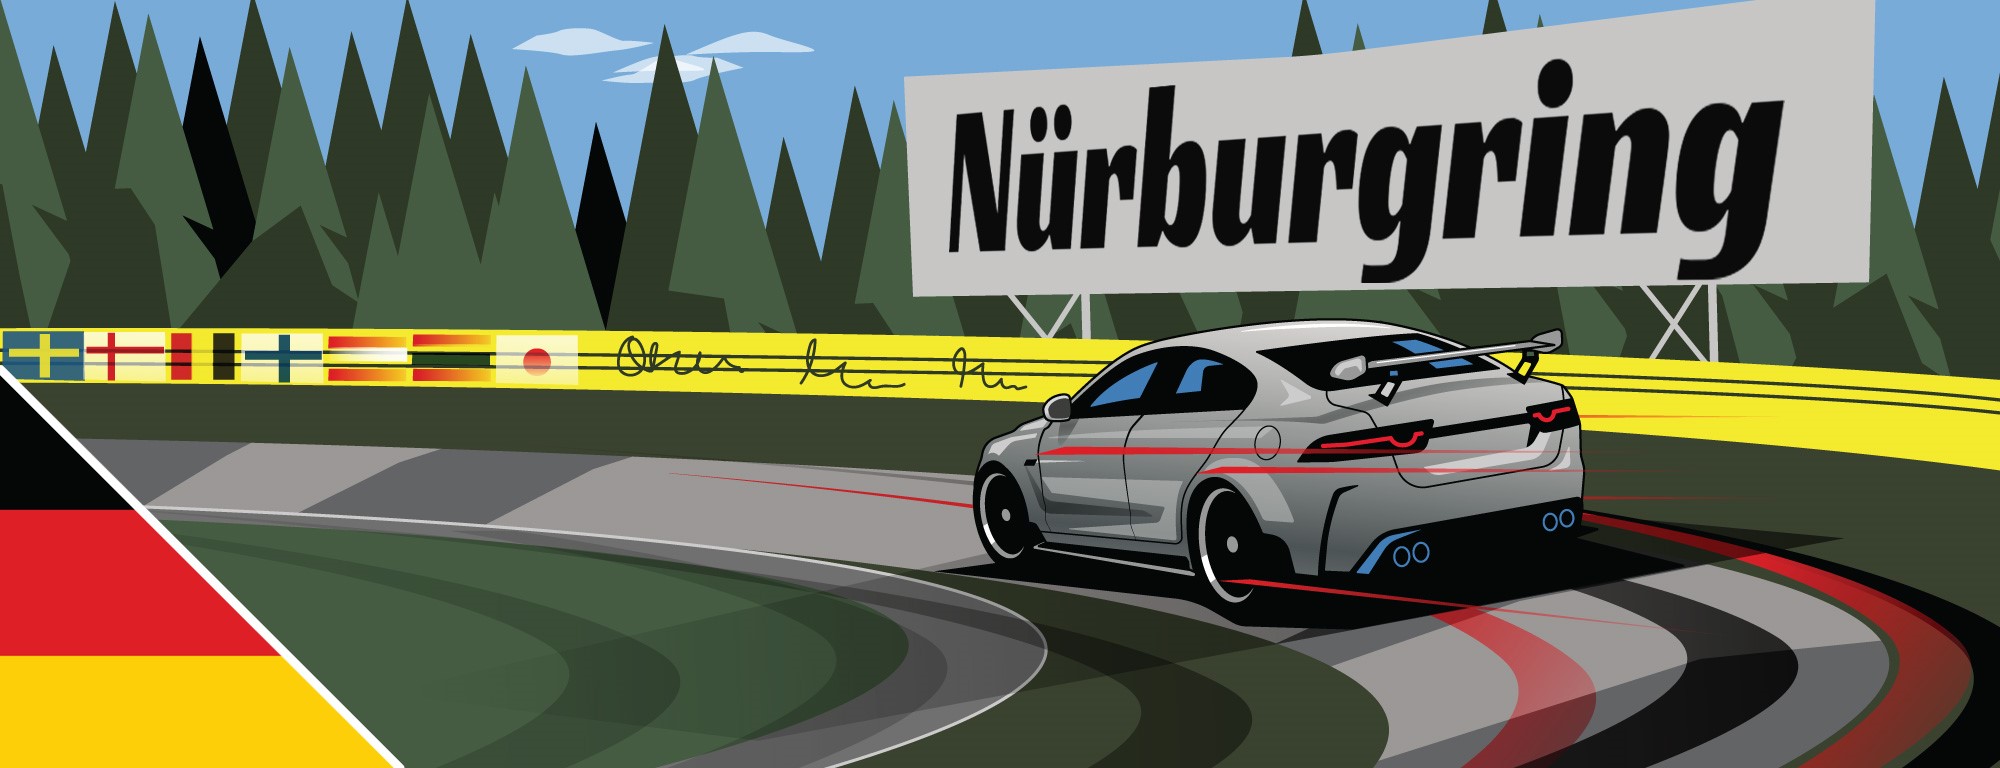 Book a Track Day at the Nurburgring Nordschleife circuit